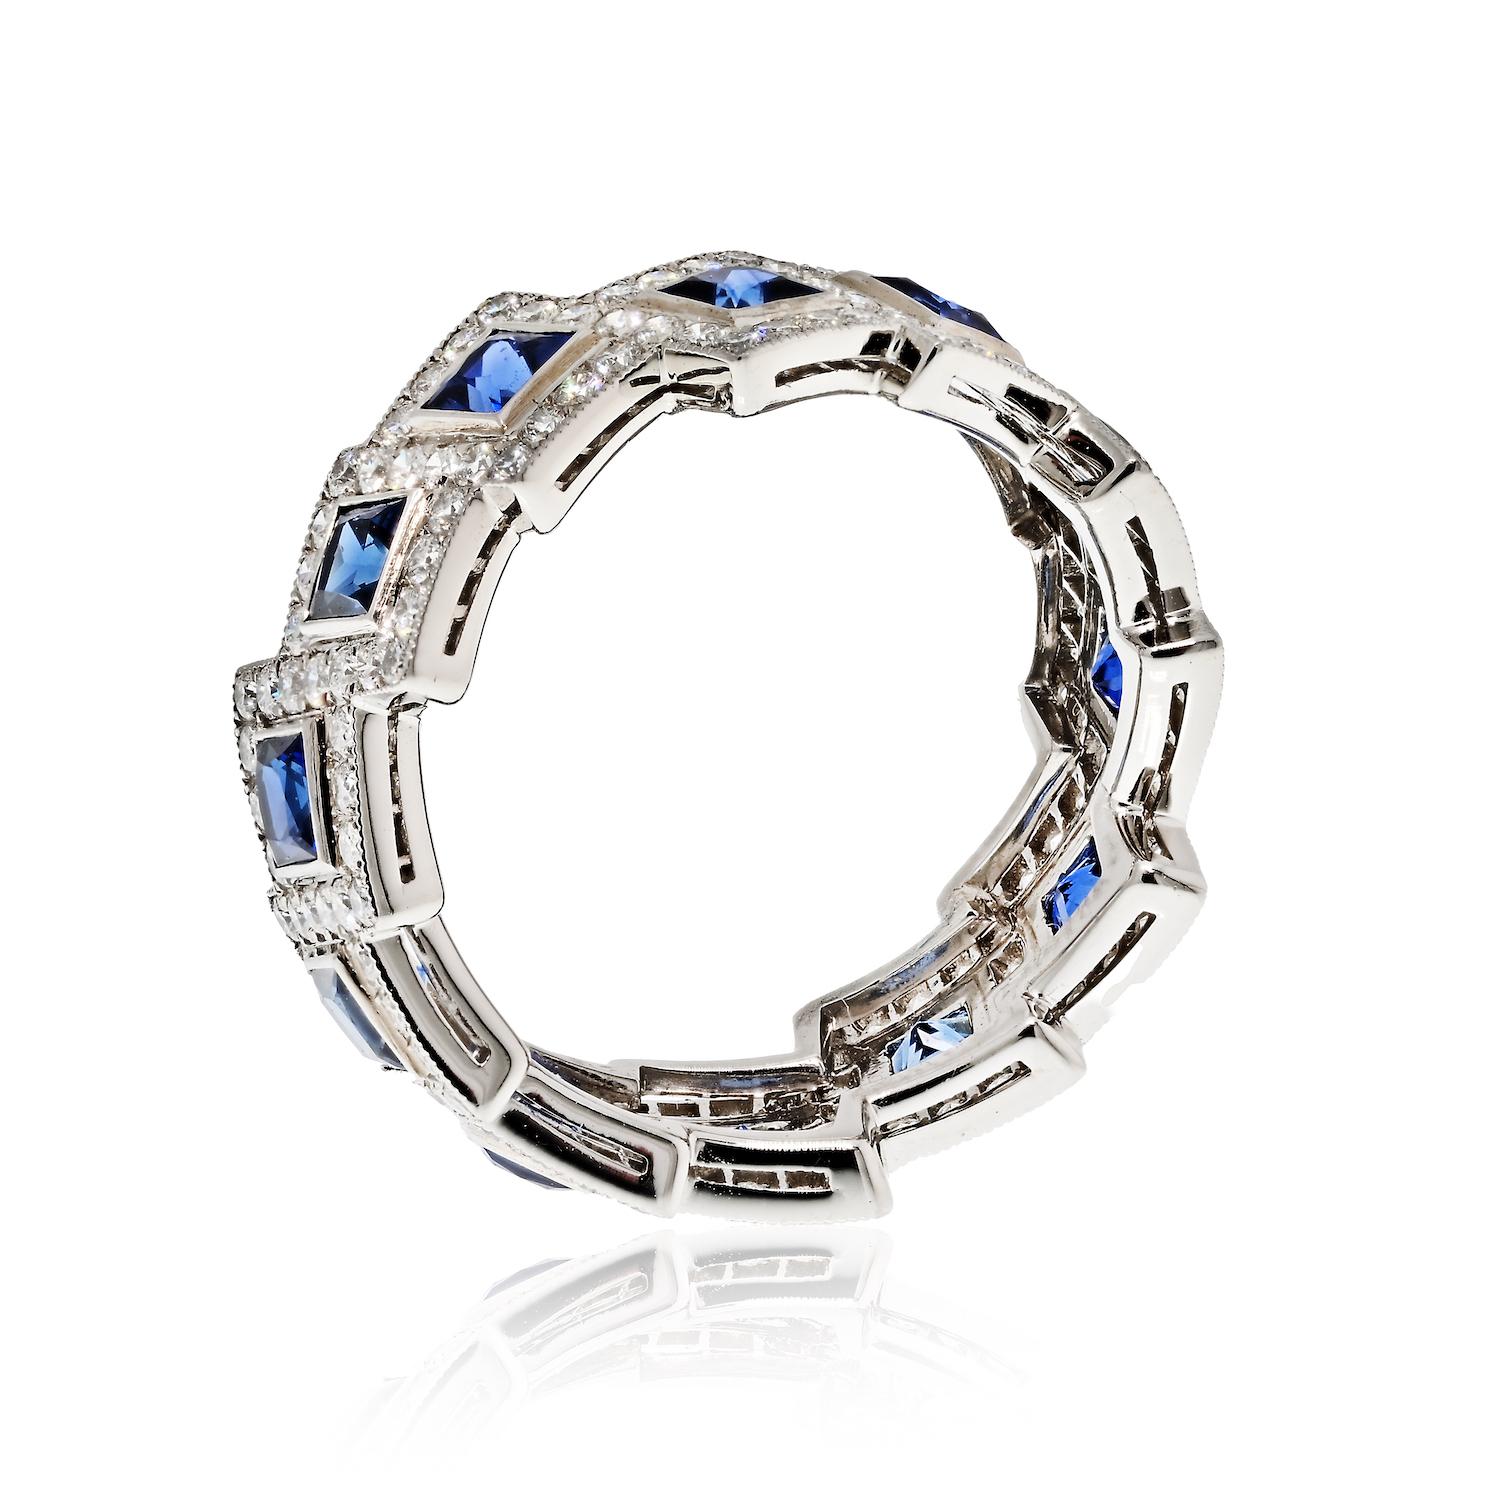 A Twist on Tradition: Sapphire and Diamond Eternity Band.

This ring is more than just an eternity band; it's a captivating twist on tradition. Crafted with square-cut sapphires of a deep, enchanting blue hue and brilliant round-cut diamonds, all